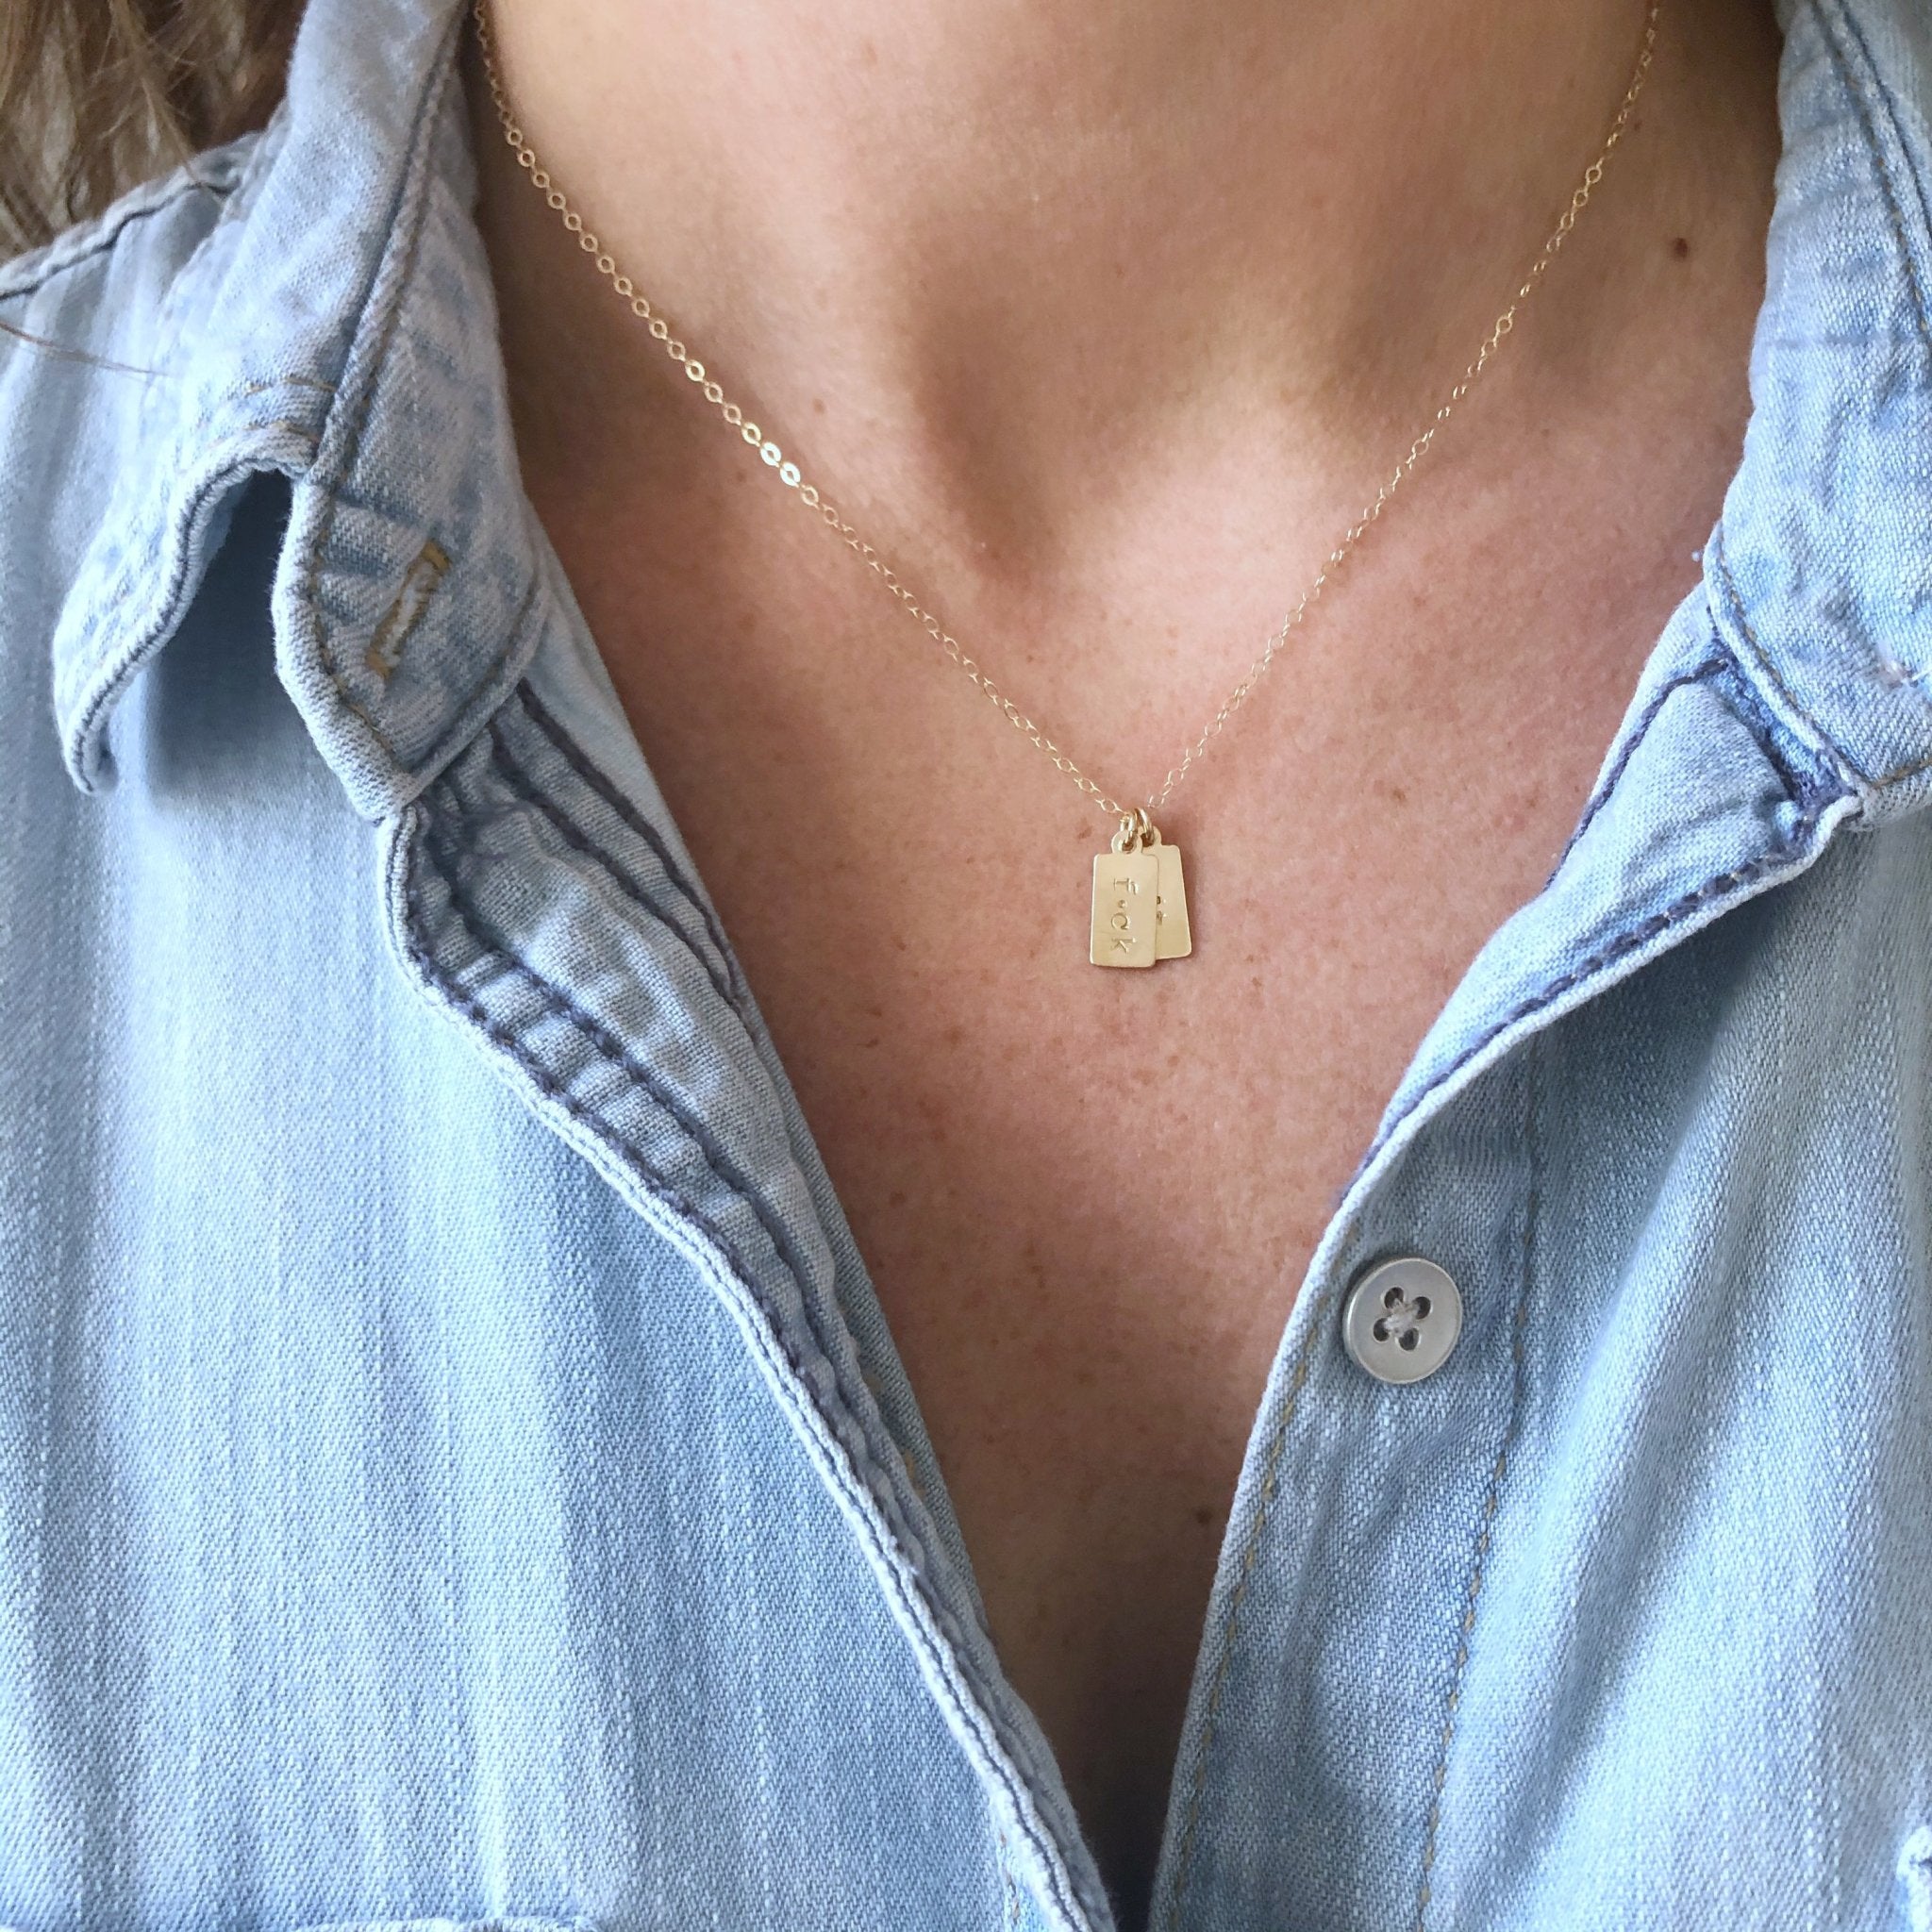 Woman's neckline wearing a denim button down with gold double tag "fuck it" layering necklace. F*ck It Necklace by Sarah Cornwell Jewelry